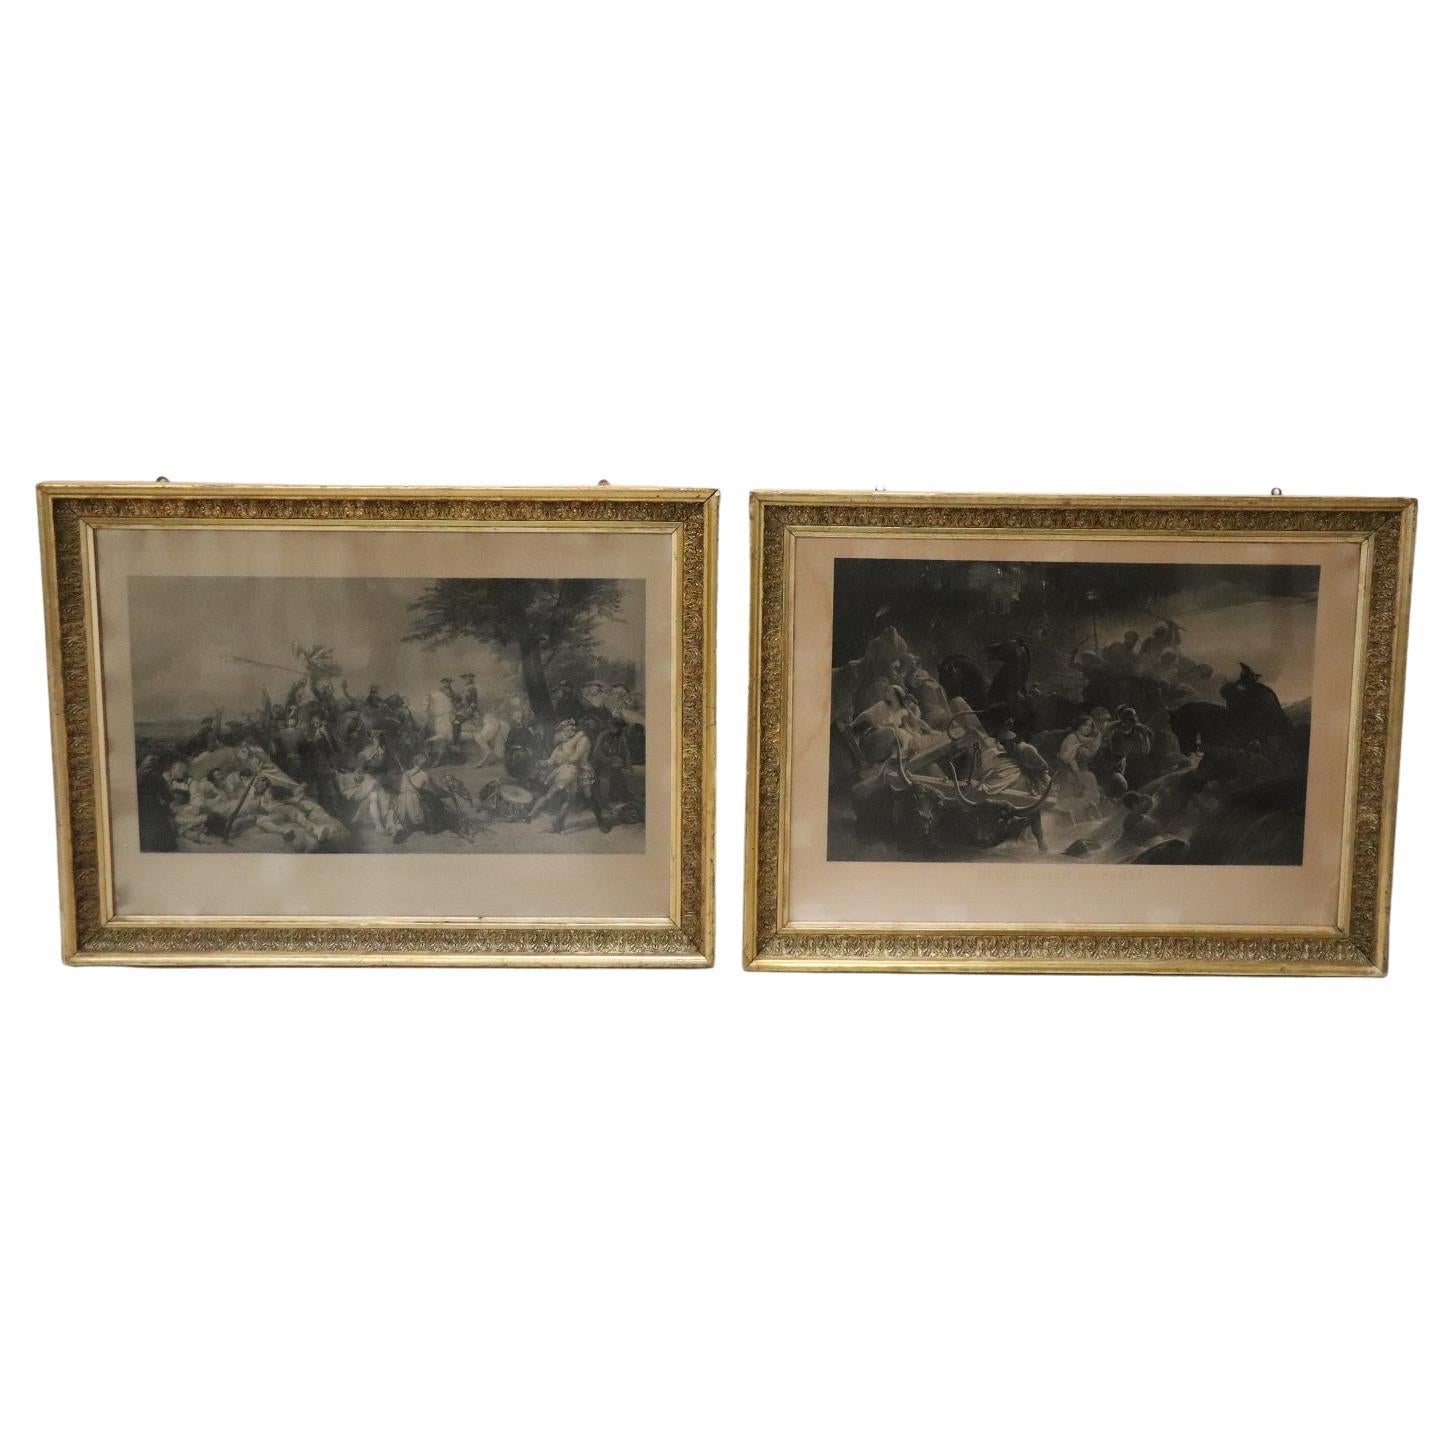 19th Century Pair of Large Antique Engravings by Jazet Jean Pierre Marie